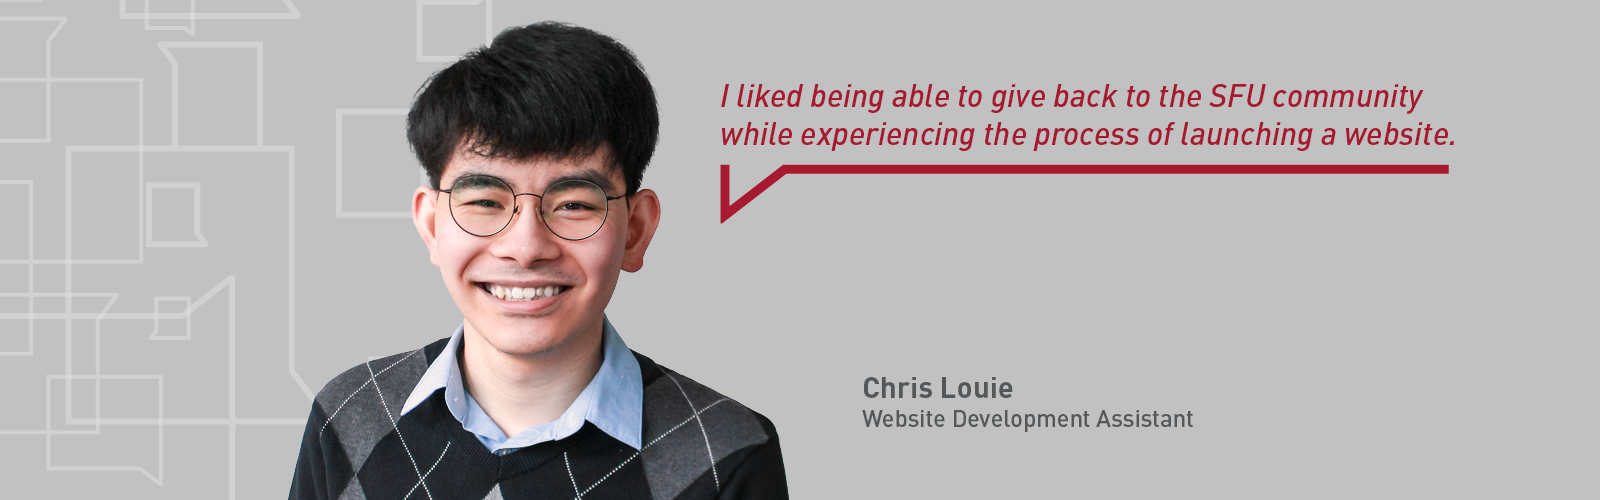 Headshot of website development assistant Chris Louie with a quote that reads "I liked being able to give back to the SFU community while experiencing the process of launching a website."